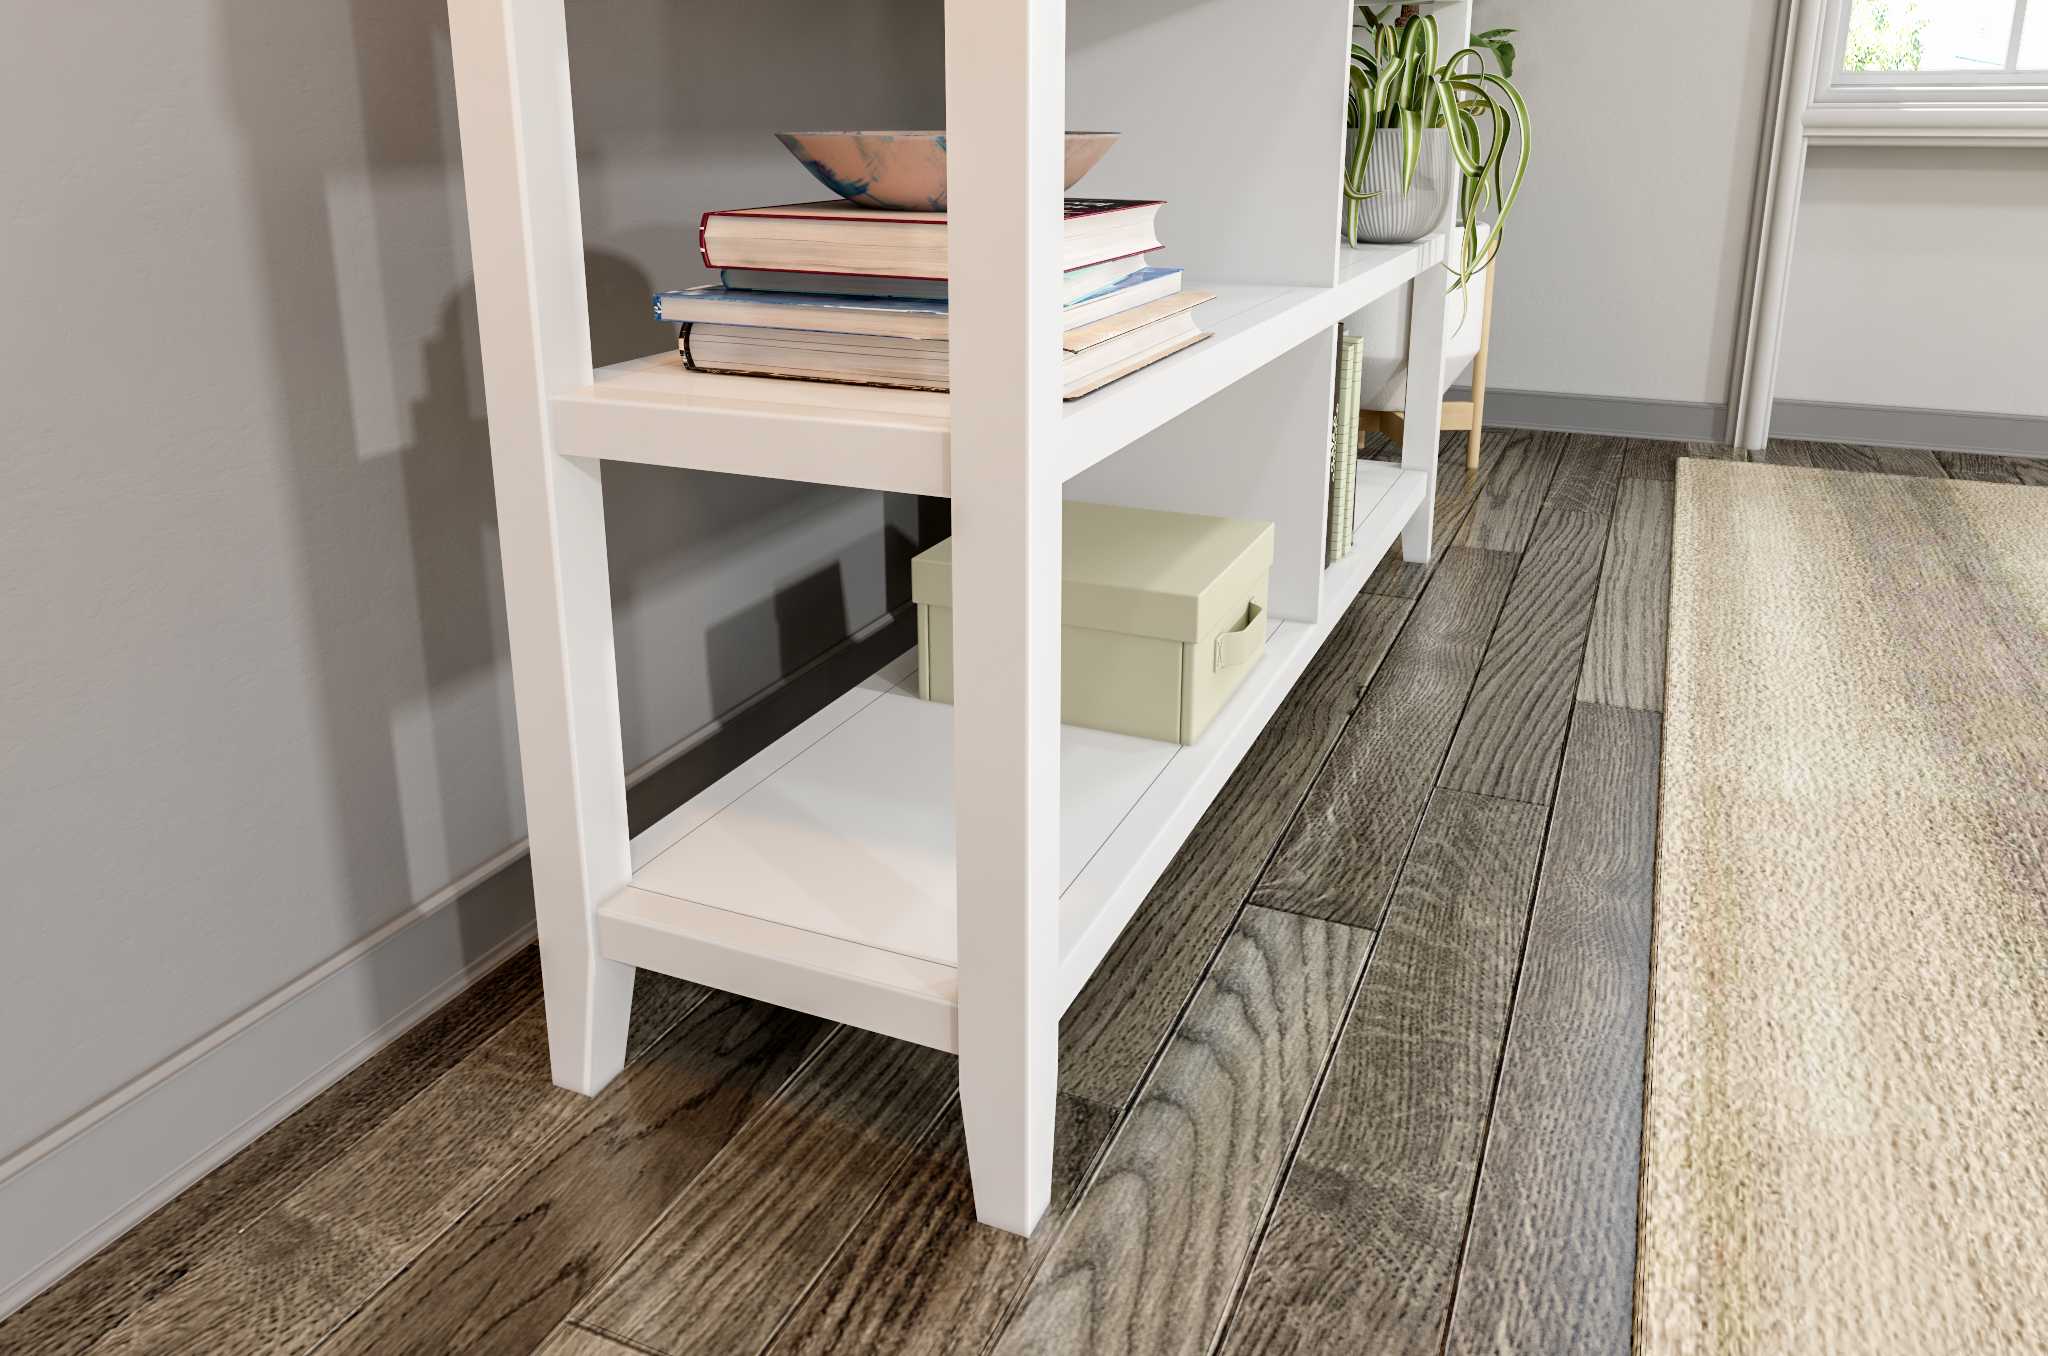 30" Bookcase with 2 Shelves in White